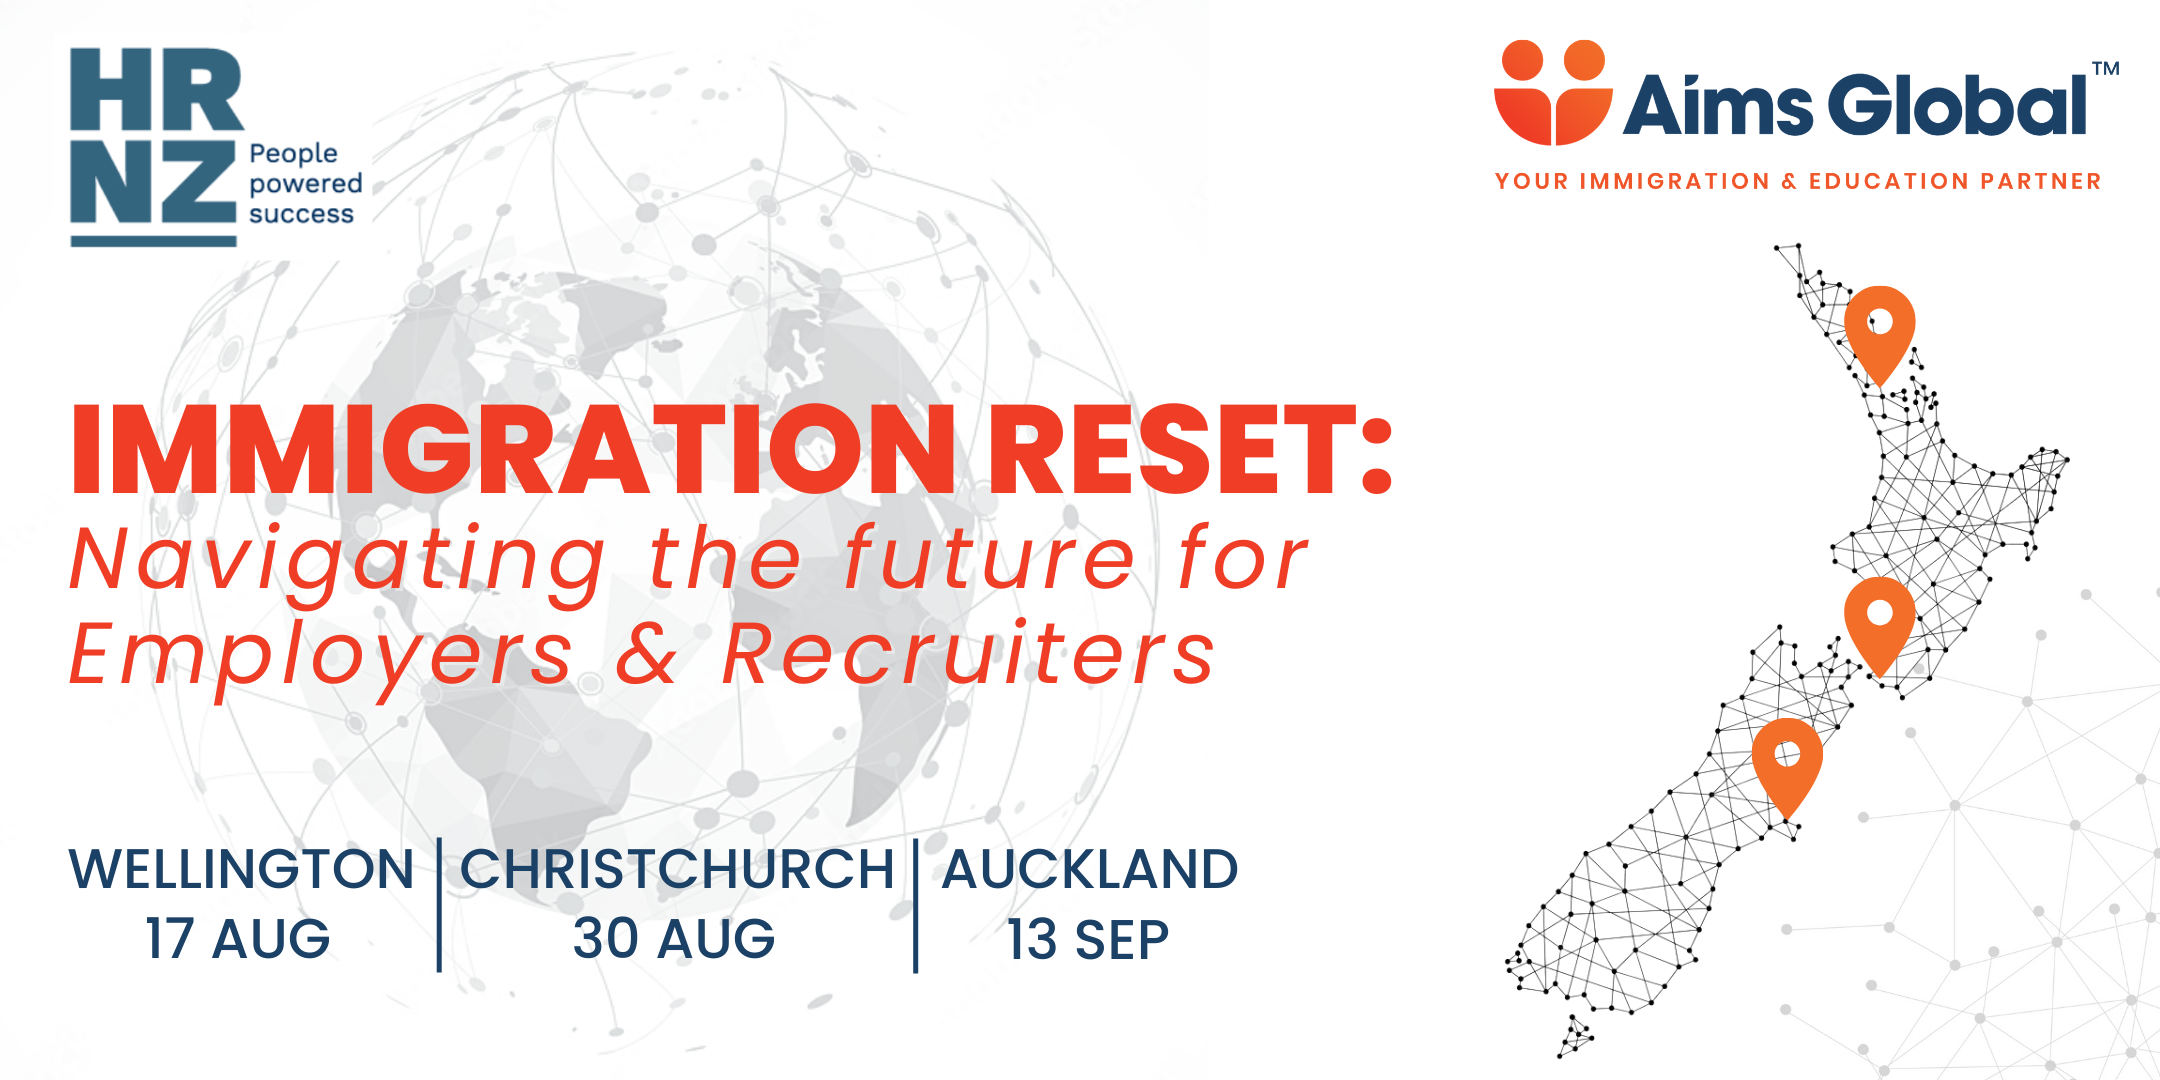 Immigration Reset: Navigating the future for Employers & Recruiters